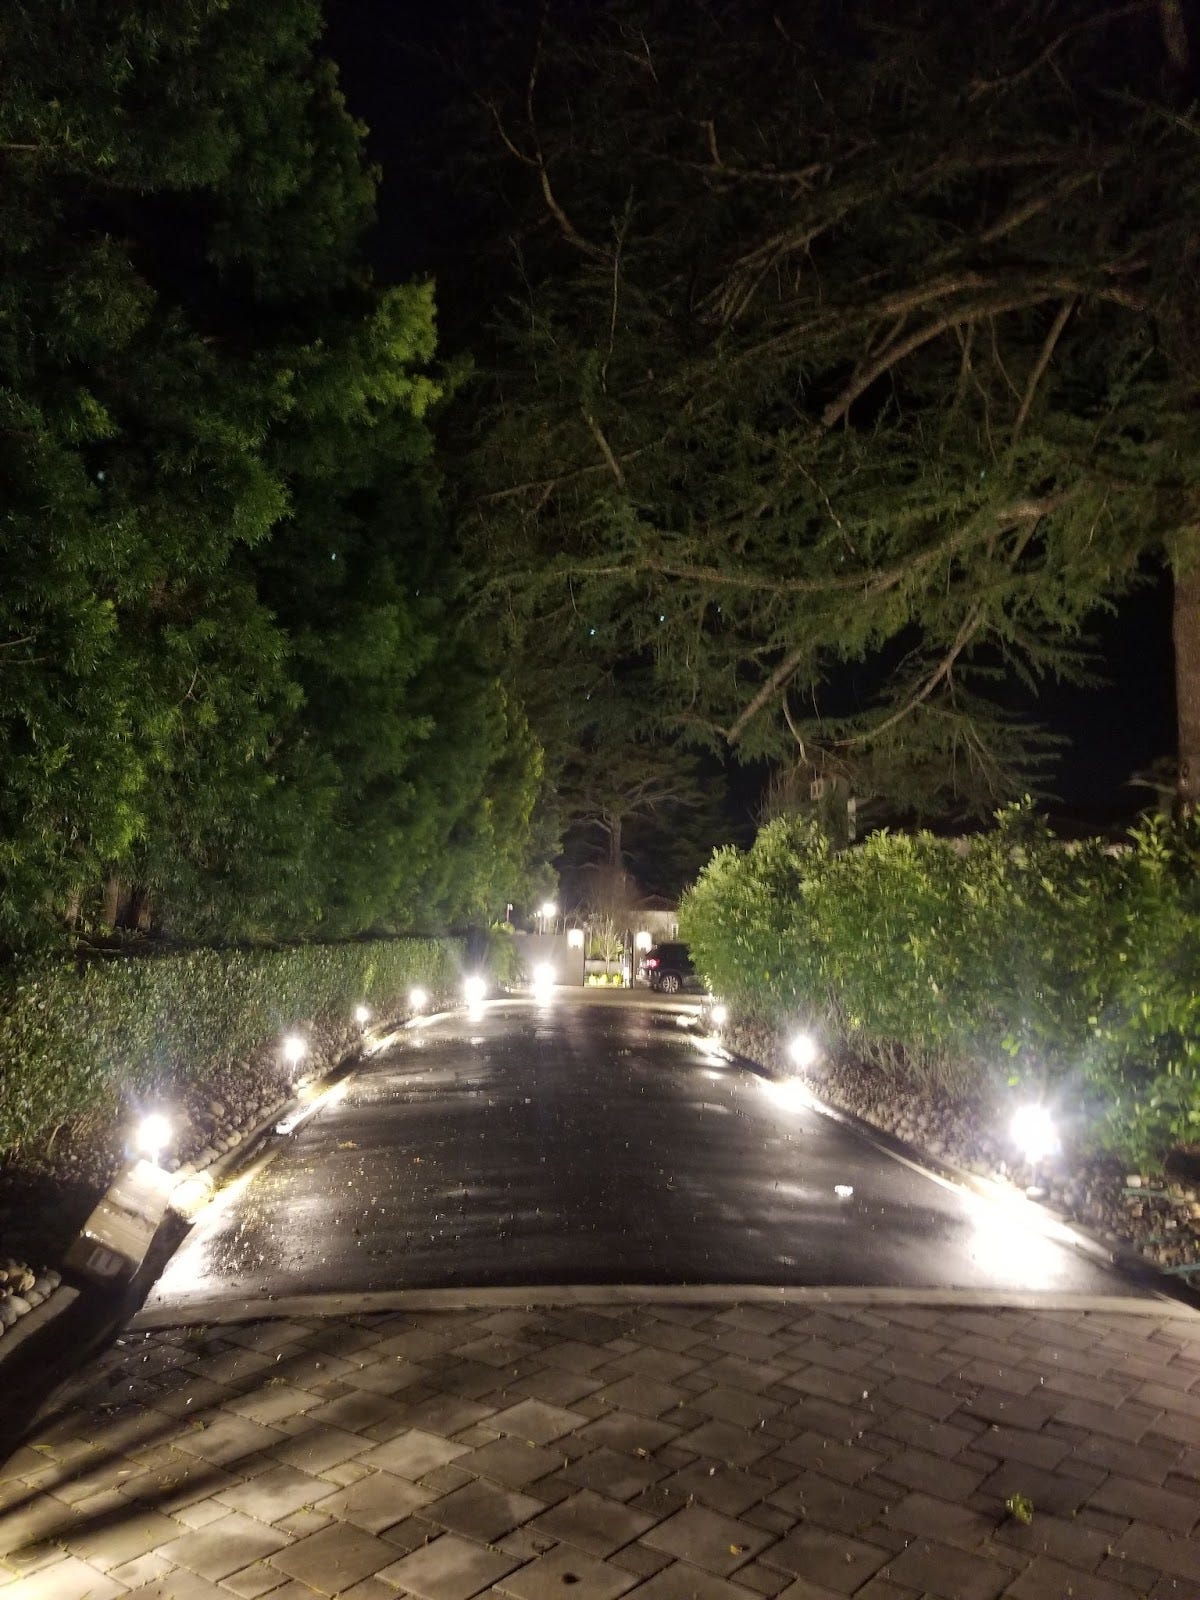 Lighted pathway surrounded by hedges at night